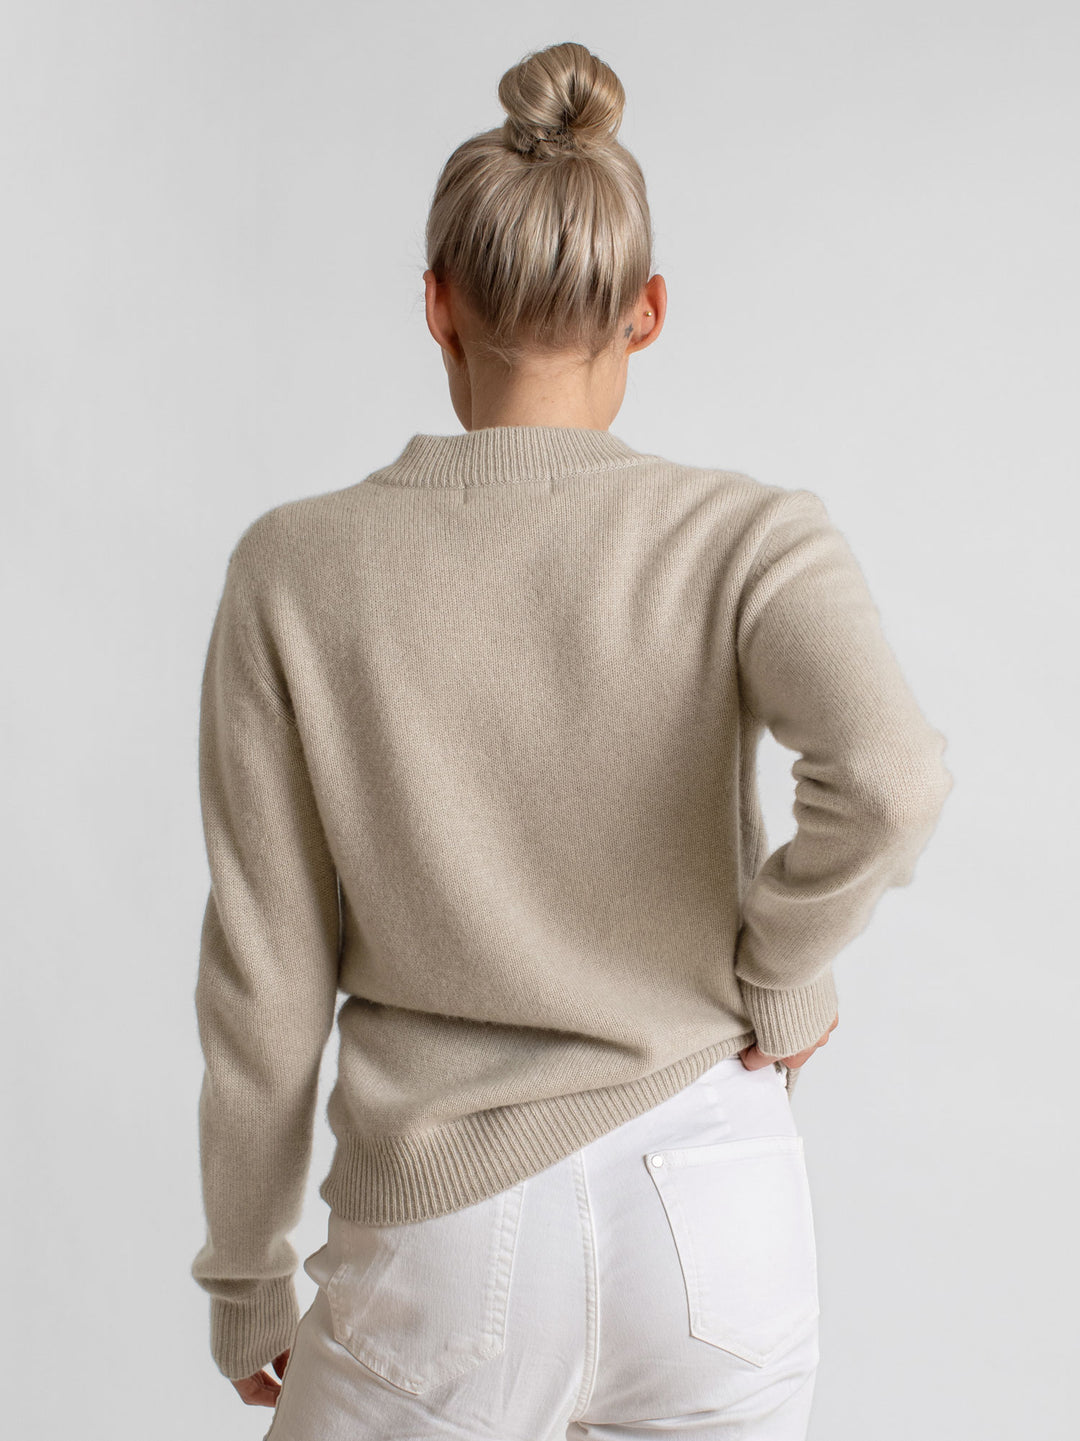 Cashmere sweater "Sofia long" color ginger. Norwegian design in 100% cashmere from Kashmina 